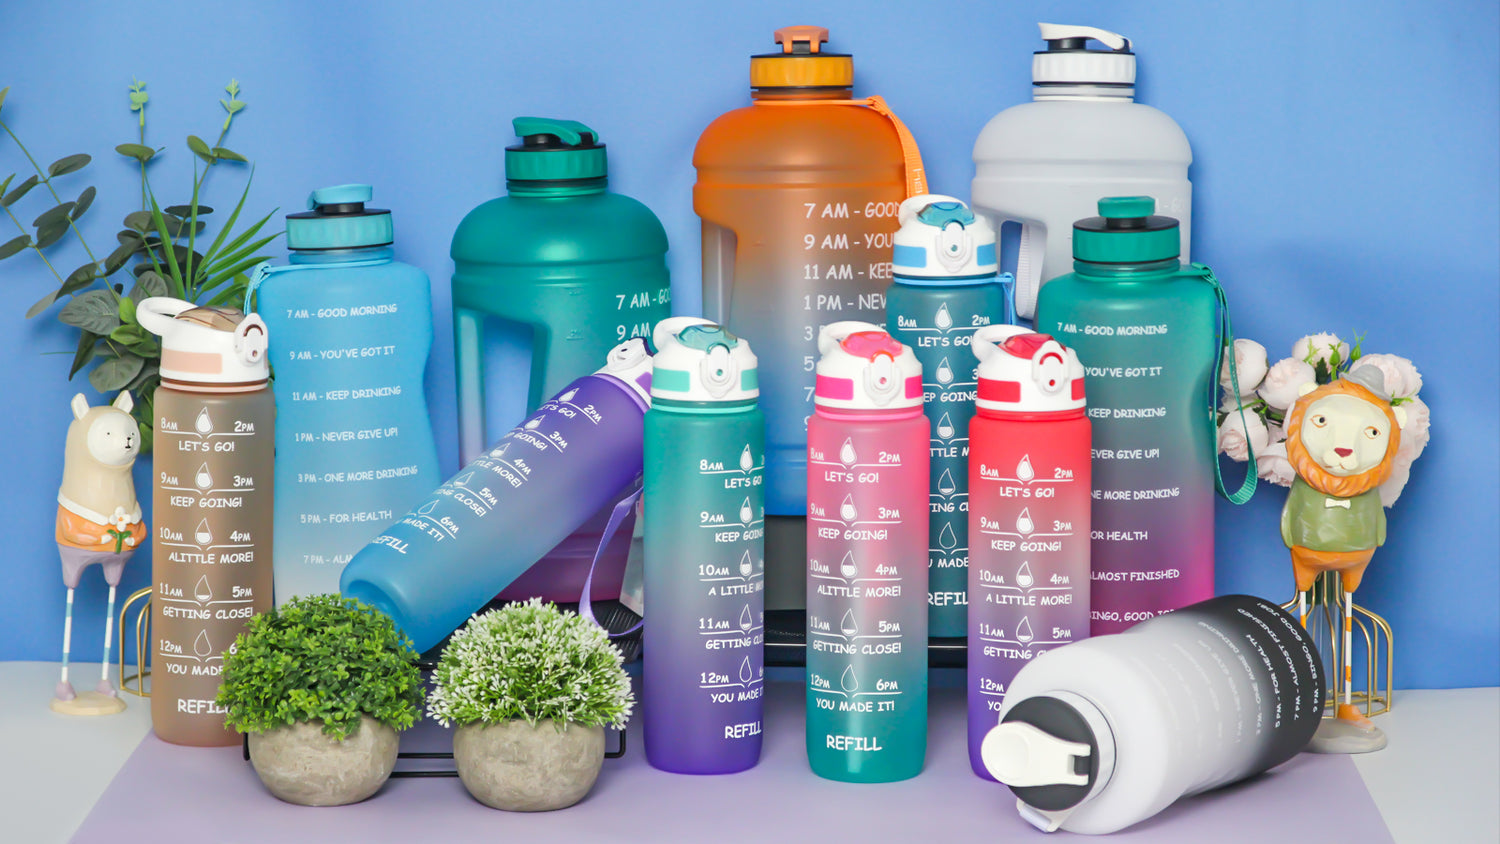 All the water bottles in different sizes and colors